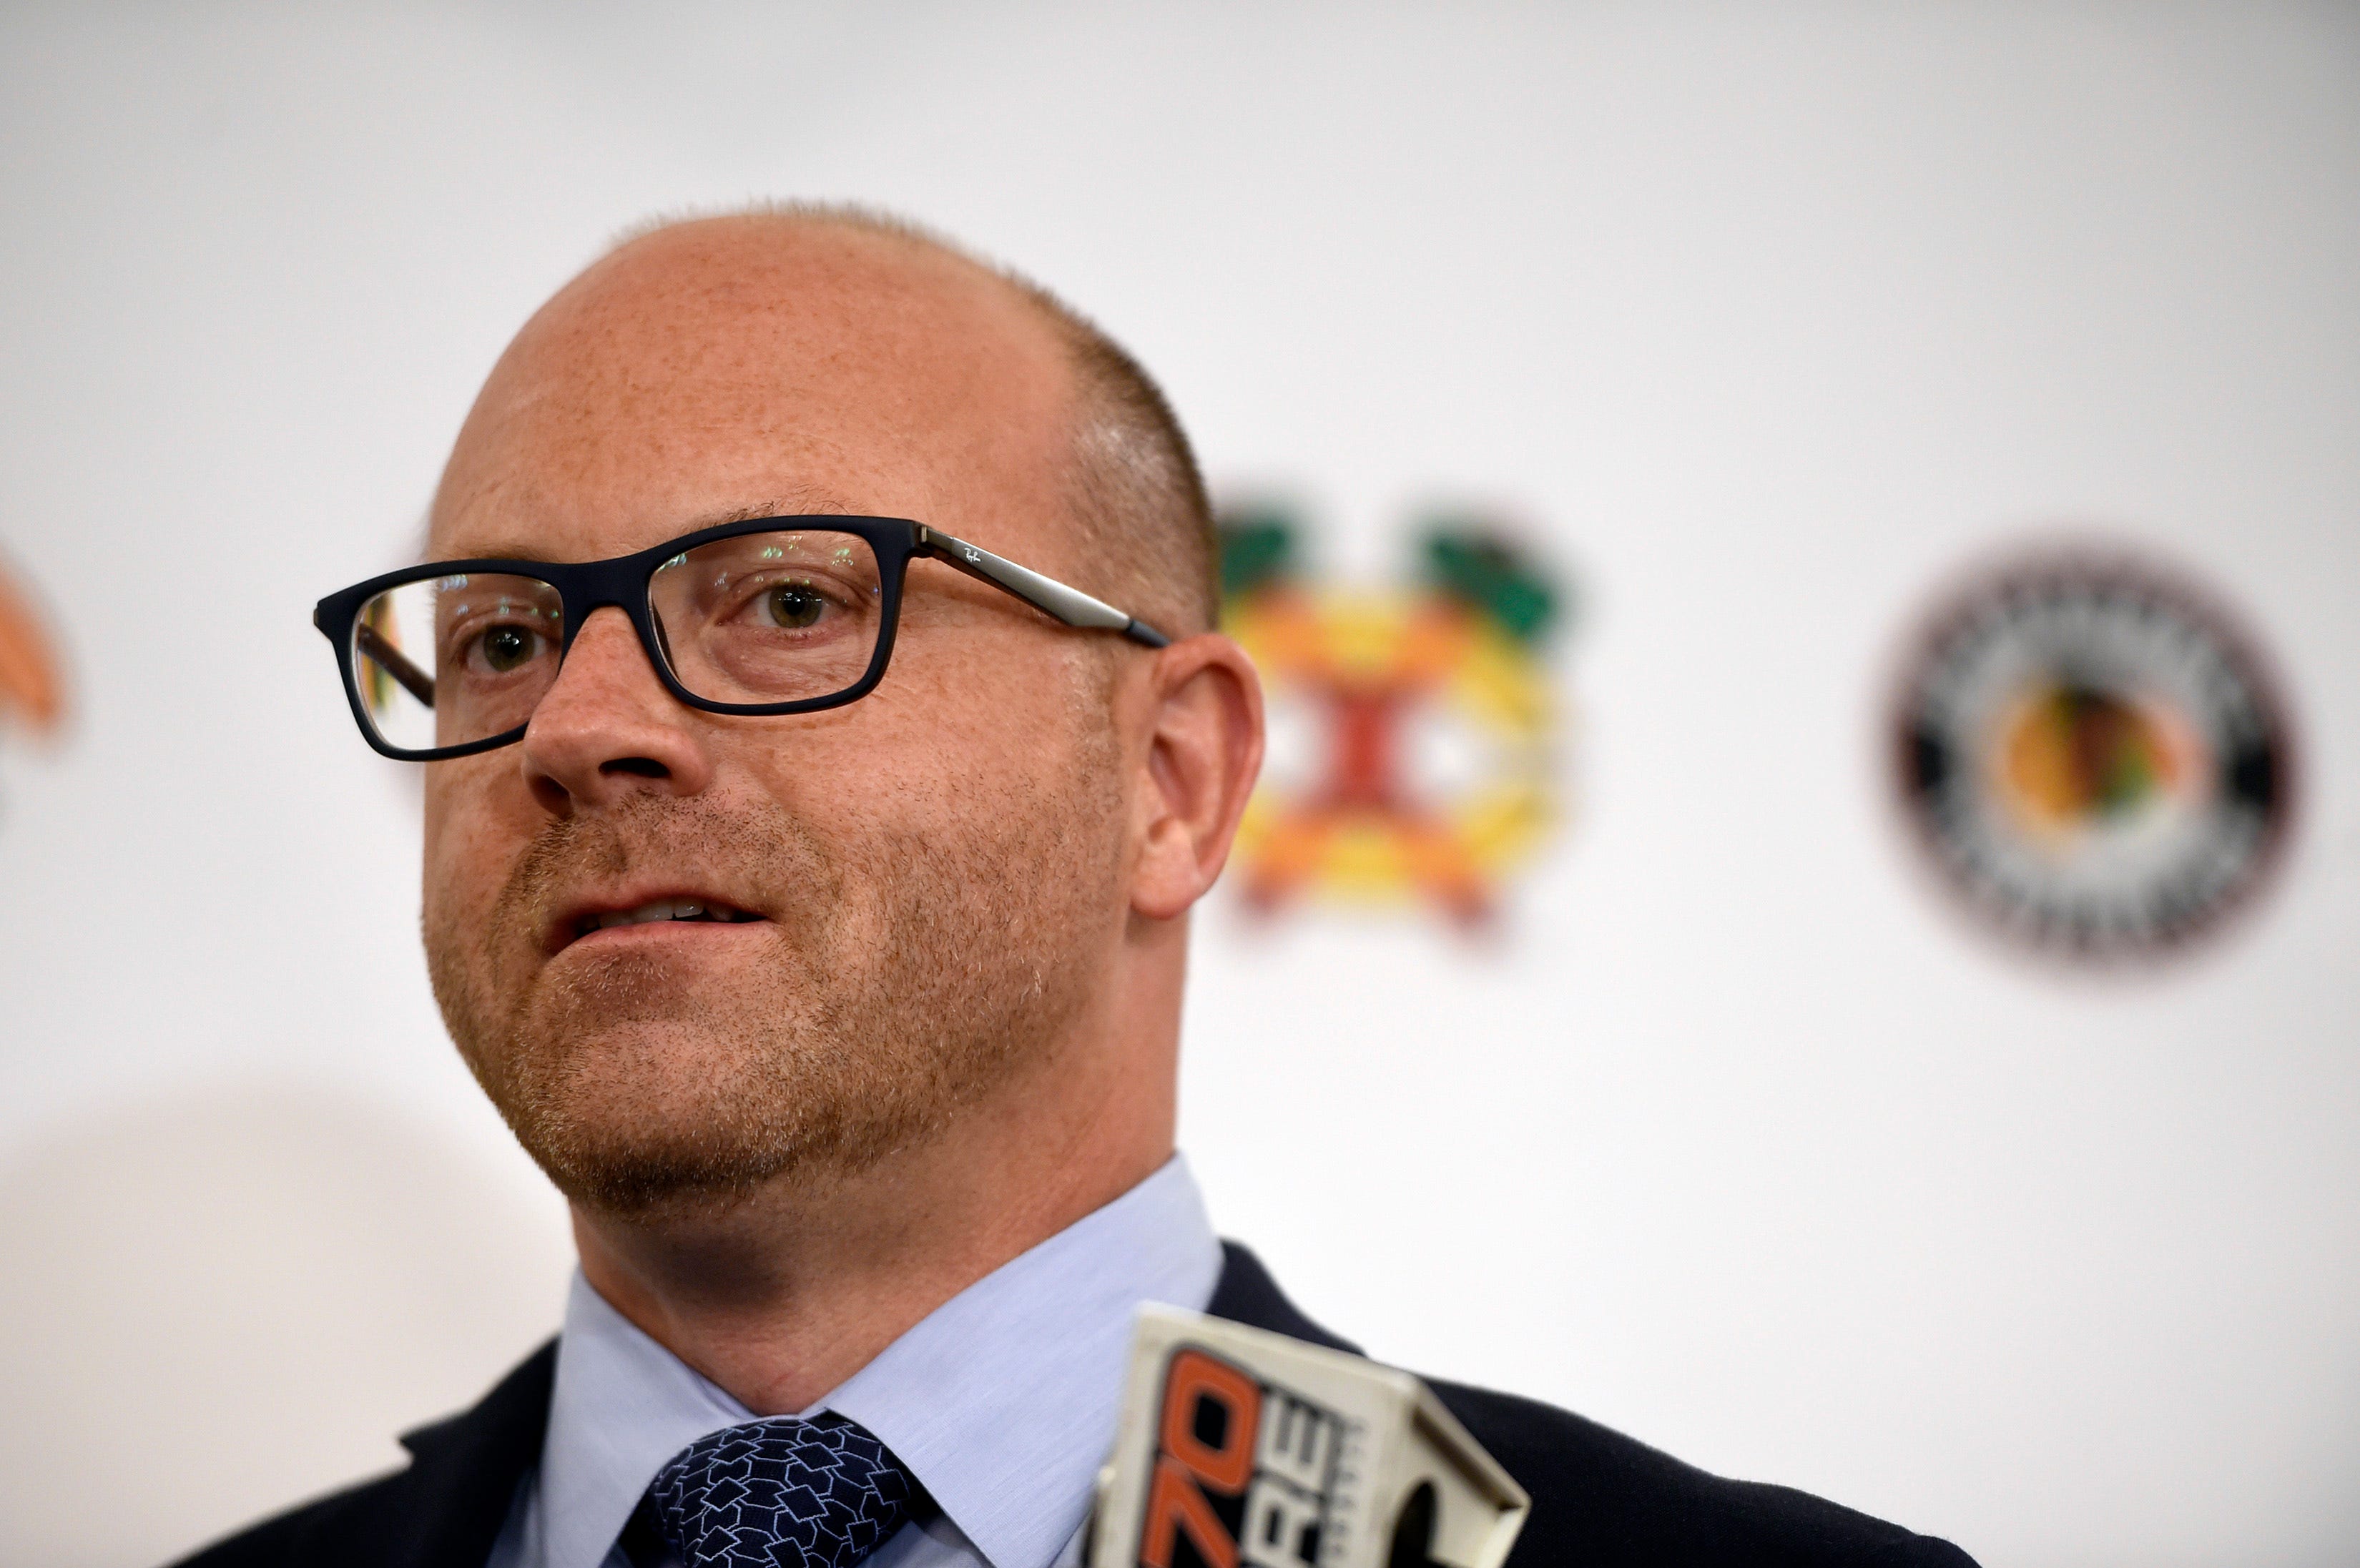 Stan Bowman resigns as US Olympic men's hockey GM in wake of Blackhawks sexual assault investigation